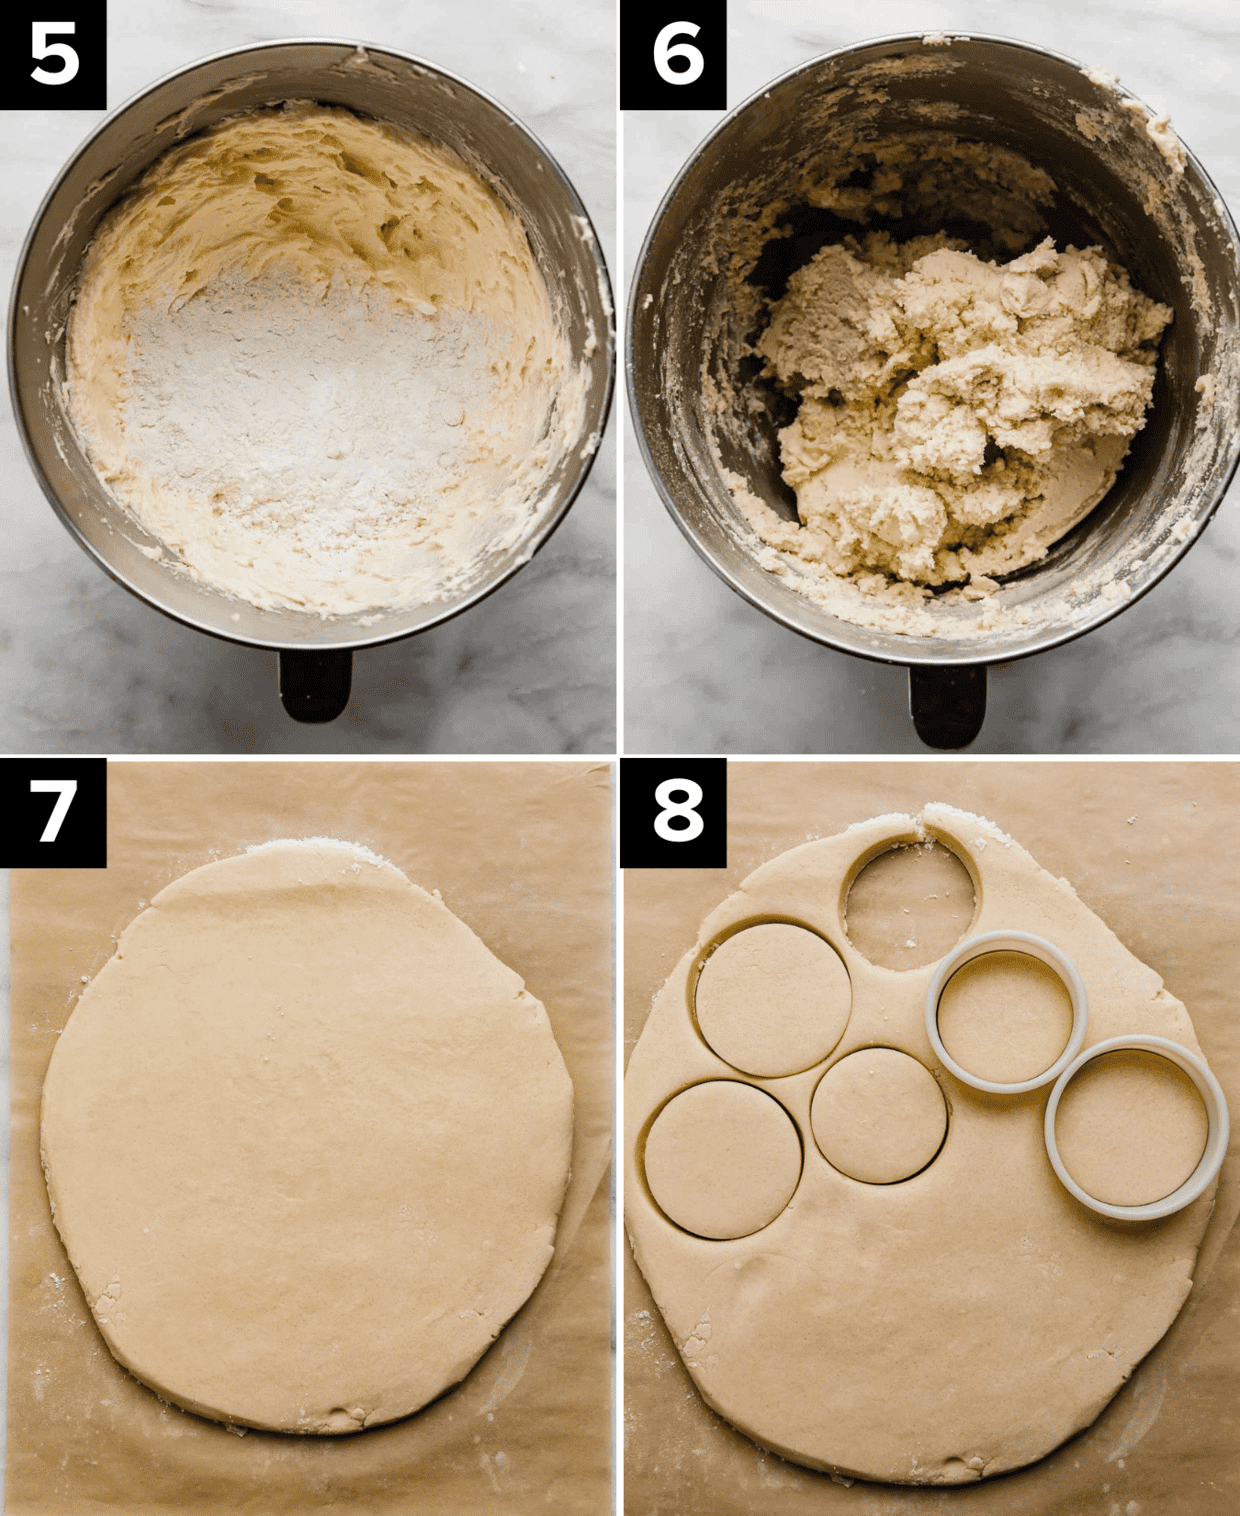 Four photos showing how to make shortbread, top left is creamed butter, sugar, and flour, top right is shortbread cookie dough, bottom left is shortbread dough rolled into an oval, bottom right is round cutter cutting shortbread cookies from the dough.